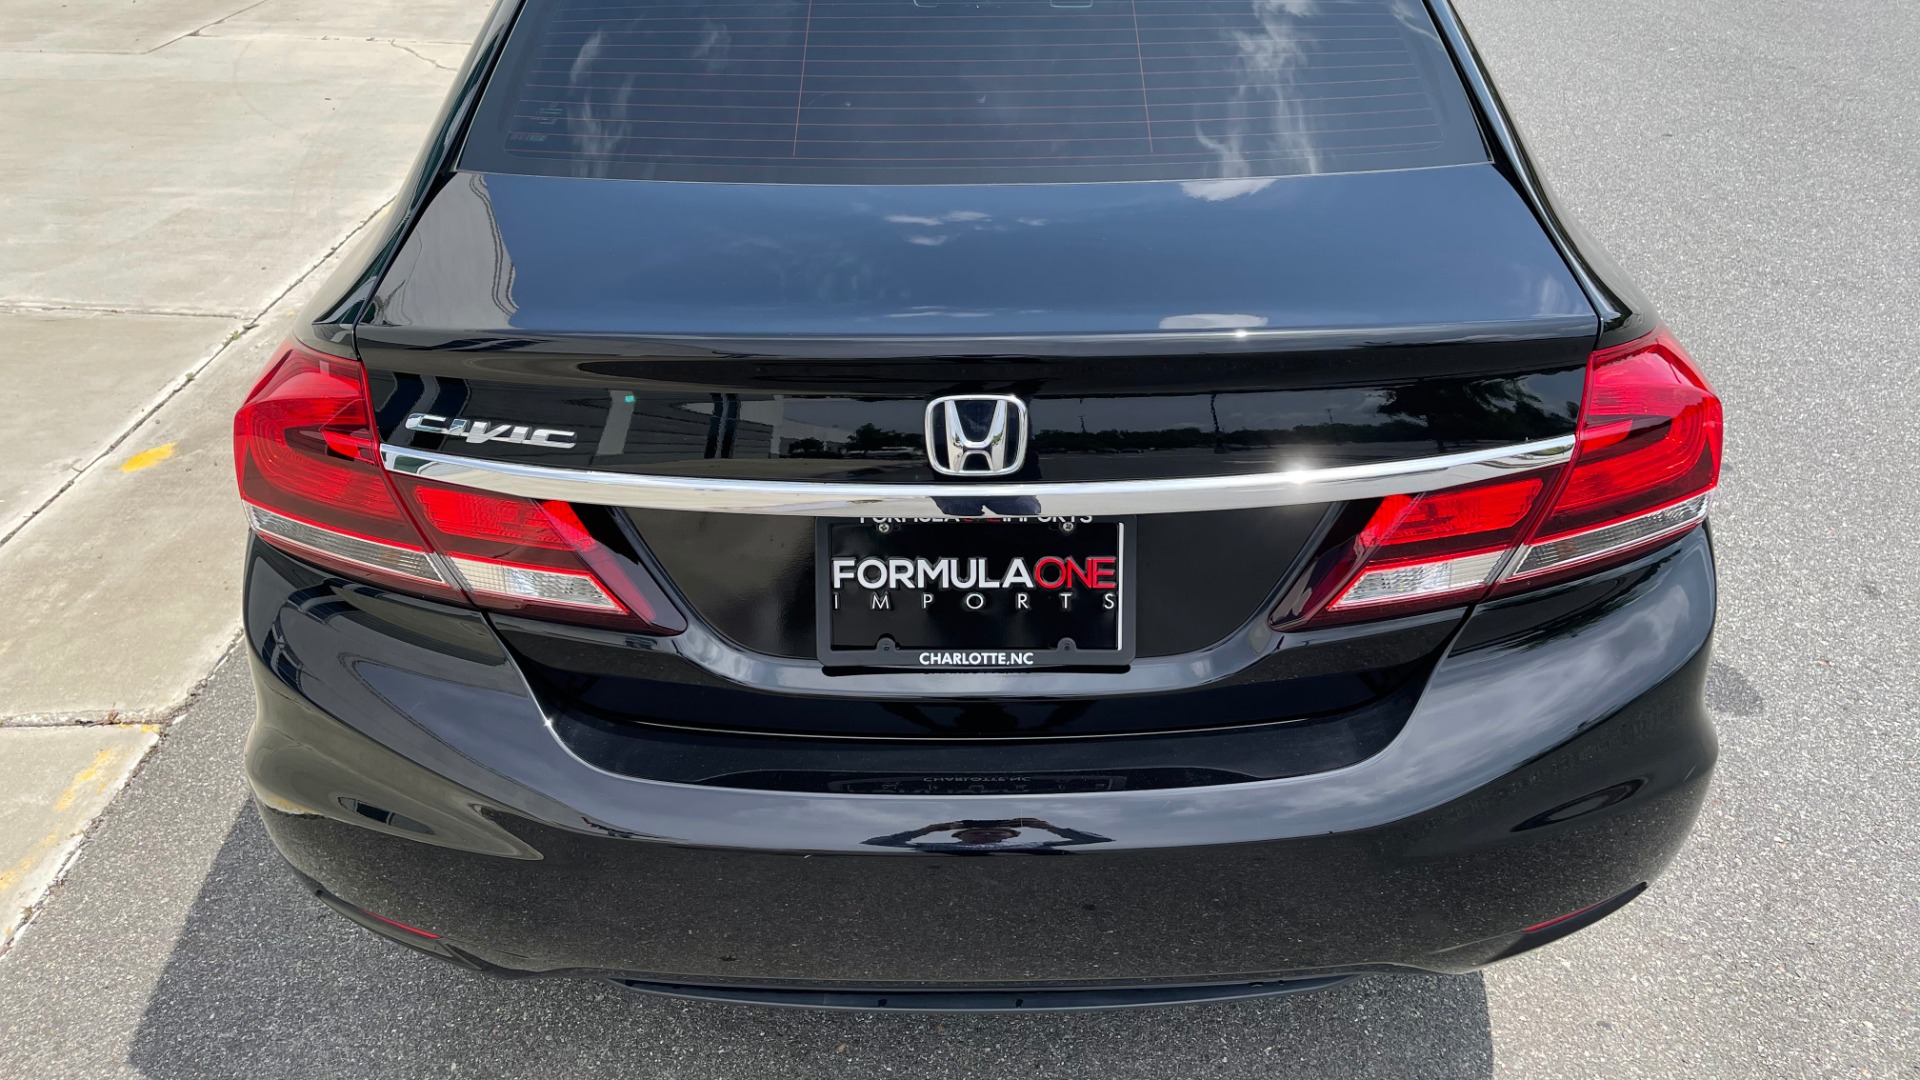 Used 2013 Honda CIVIC SEDAN LX / 5-SPD AUTO / 1.8L 4-CYL / BLUETOOTH / AIR CONDITIONING for sale Sold at Formula Imports in Charlotte NC 28227 11